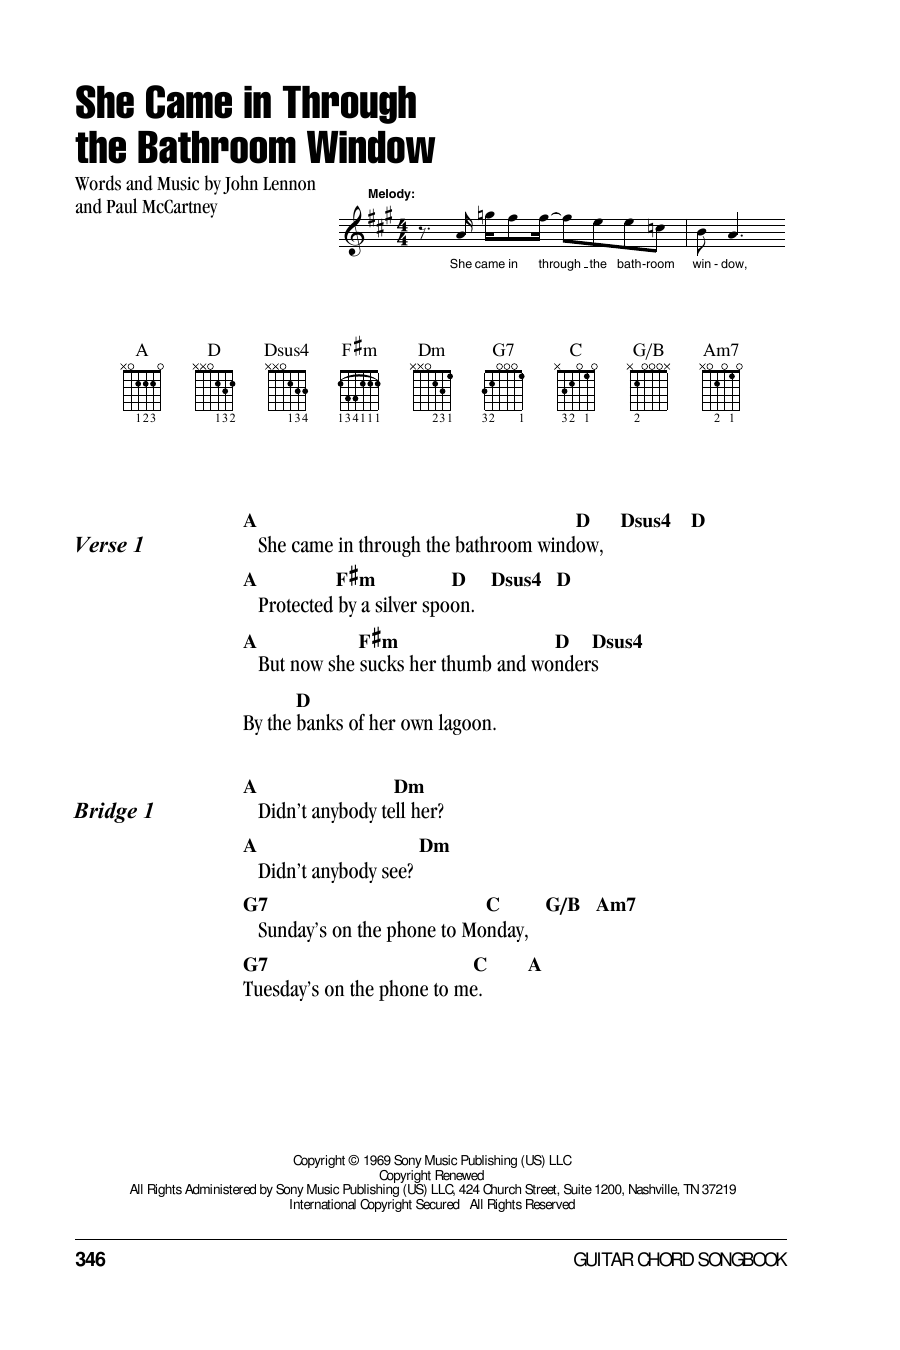 Download The Beatles She Came In Through The Bathroom Window Sheet Music